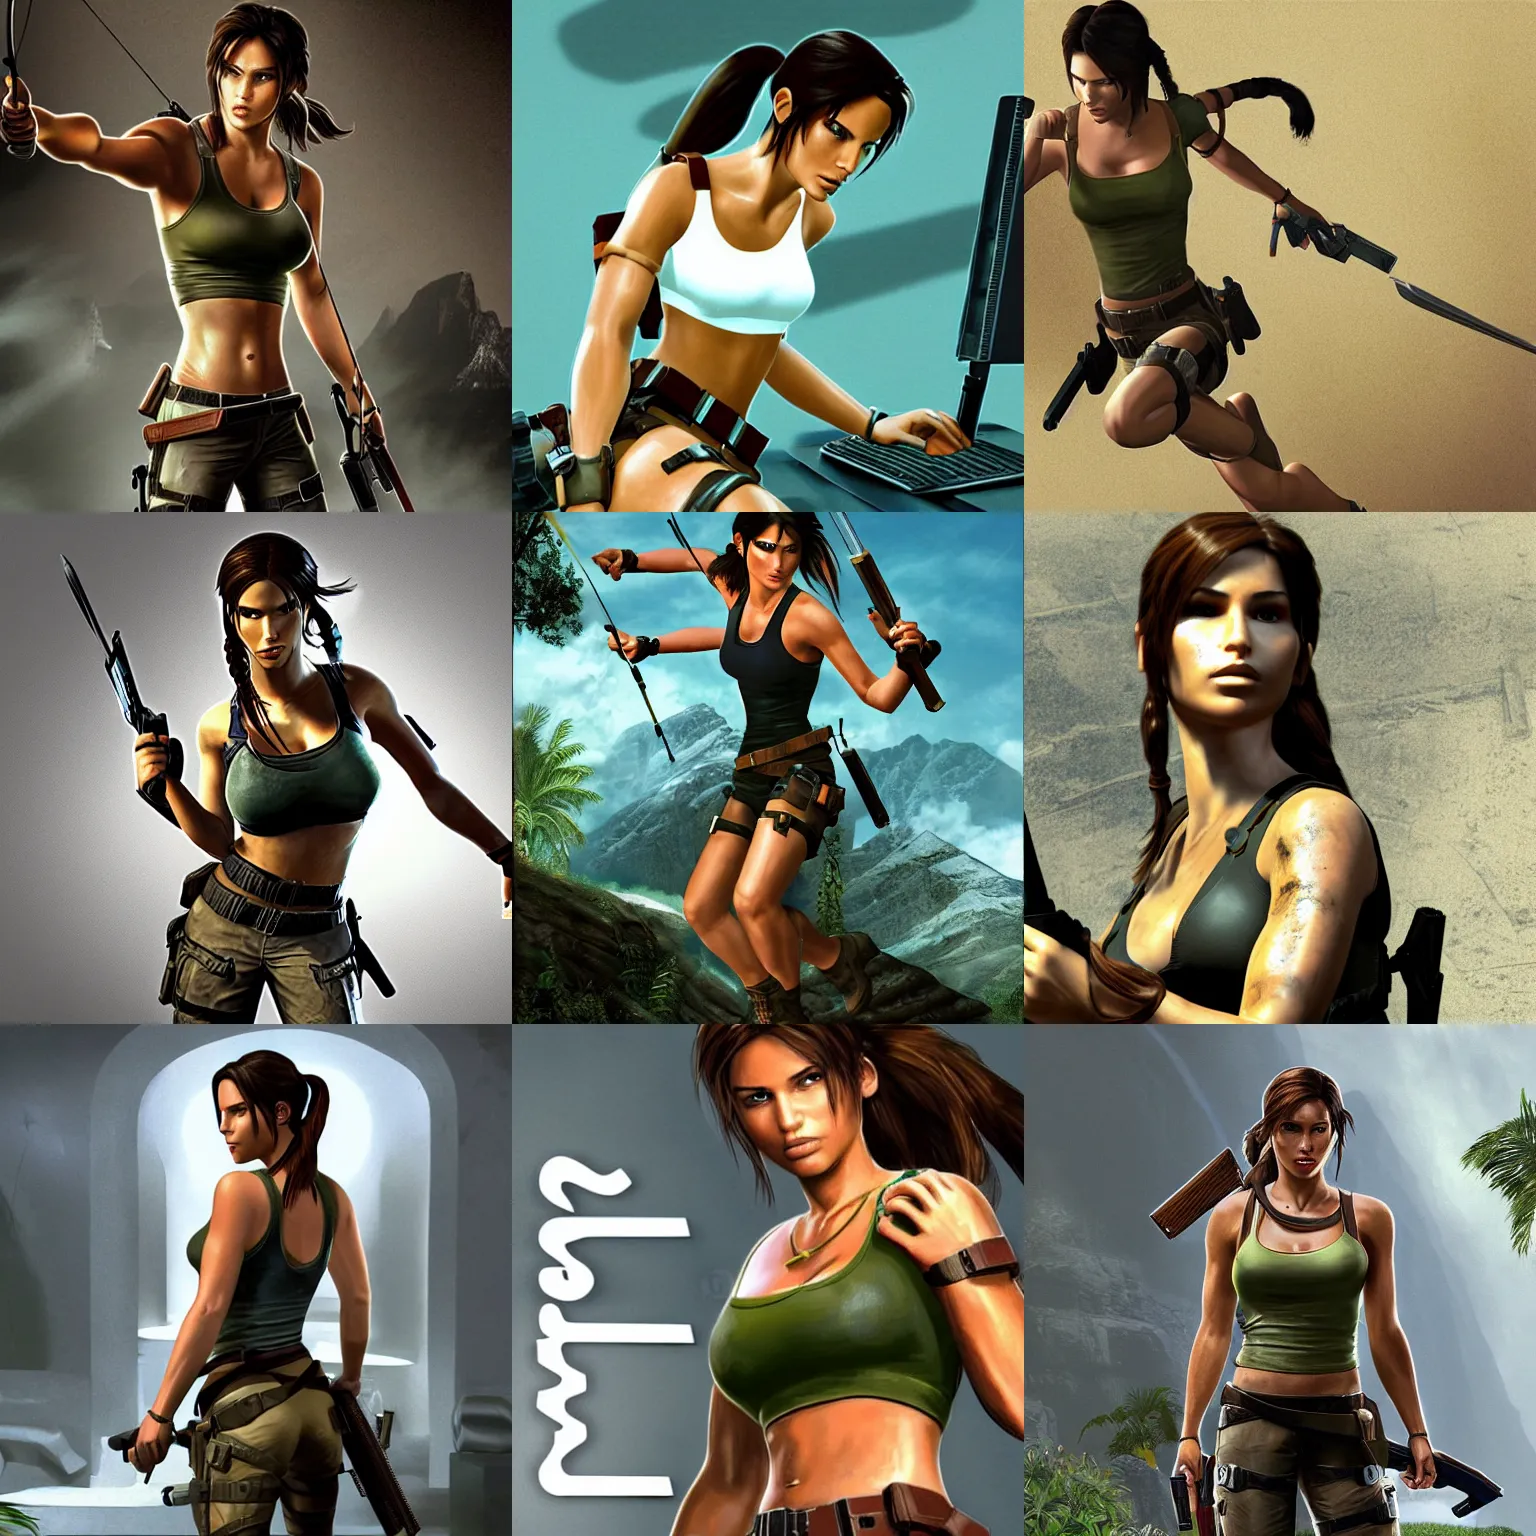 Prompt: Lara Croft on her computer searching Google, promotional rendering, 3d, 1990s style, original Tomb Raider